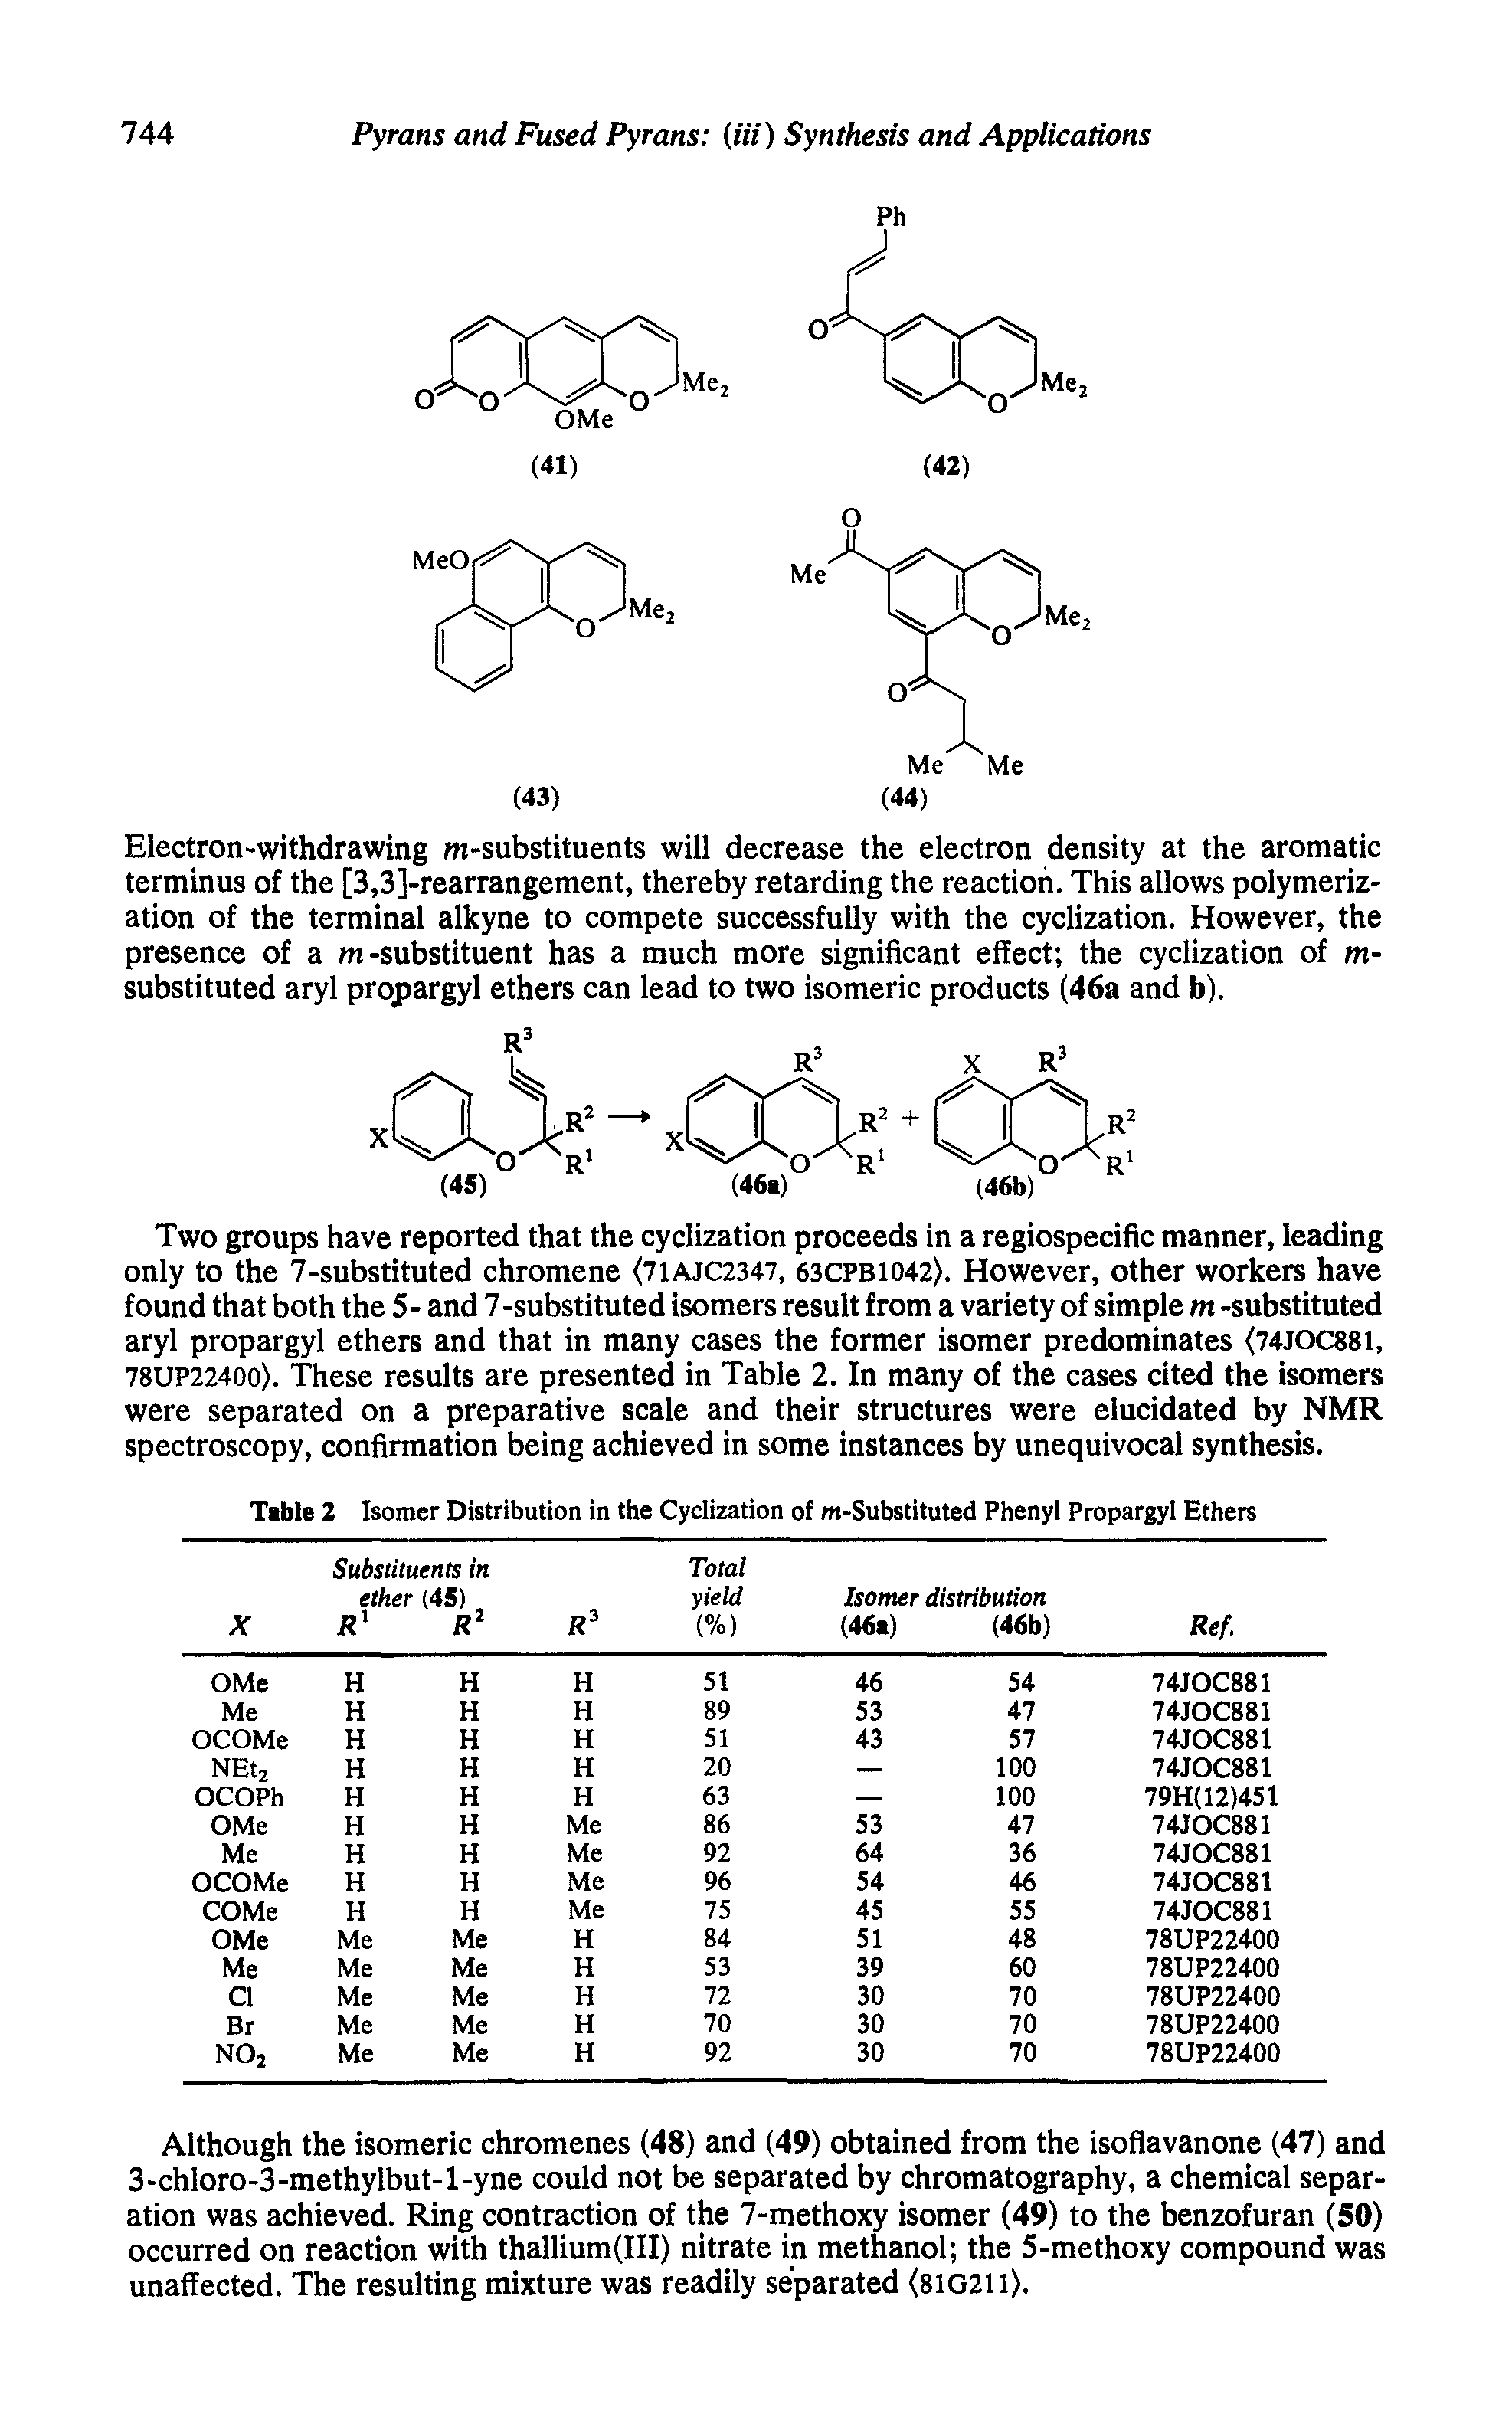 Table 2 Isomer Distribution in the Cyclization of m-Substituted Phenyl Propargyl Ethers...